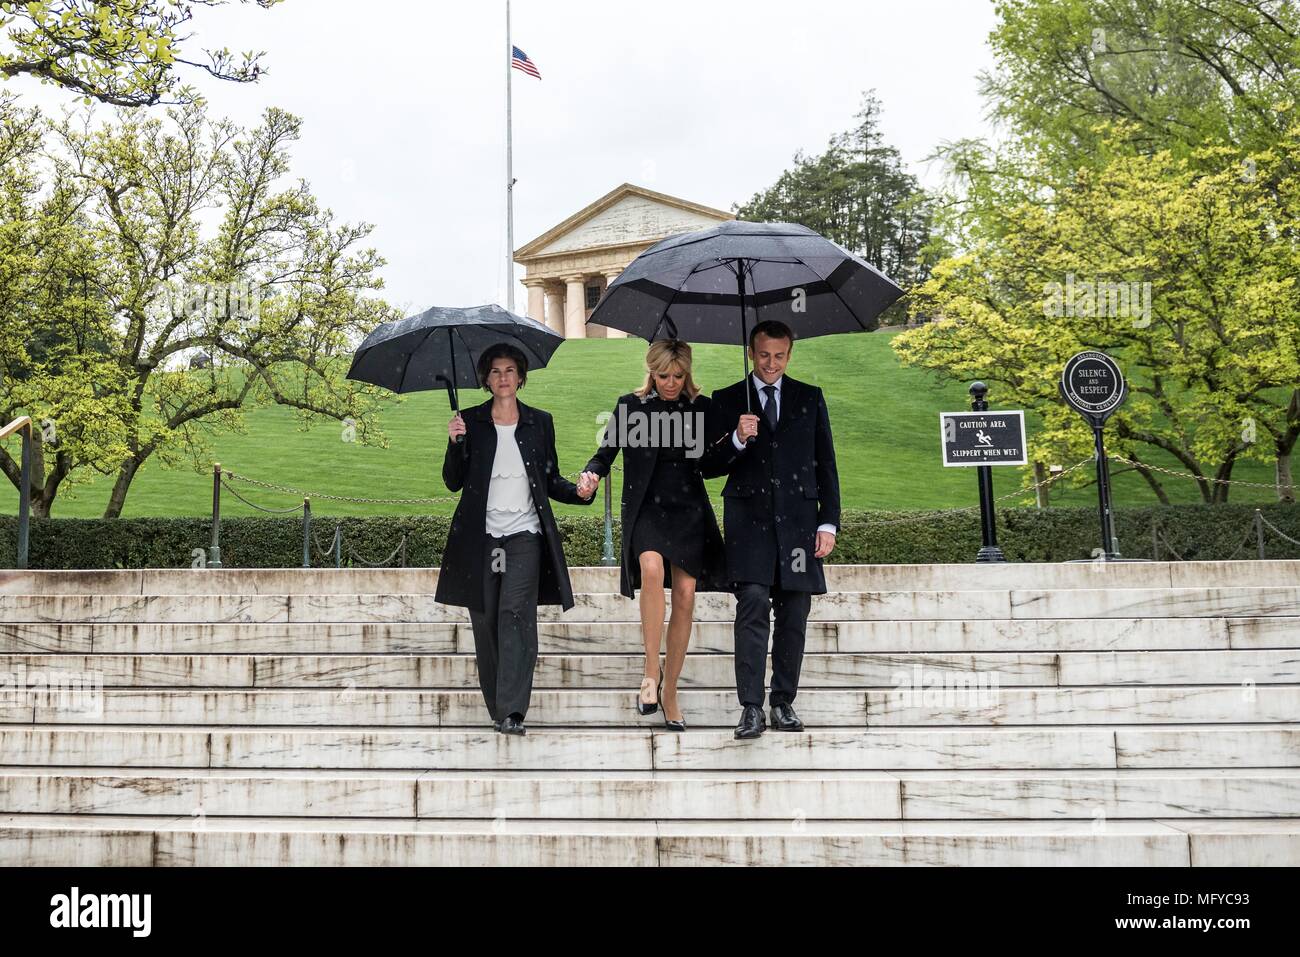 French President Emmanuel Macron, right, and his wife Brigitte Macron, are escorted by superintendent Katharine Kelley, left, during a visit to the gravesite of former President John F. Kennedy and Jacqueline Bouvier Kennedy Onassis on a rainy day at Arlington National Cemetery April 24, 2018 in Arlington, Virginia. Stock Photo